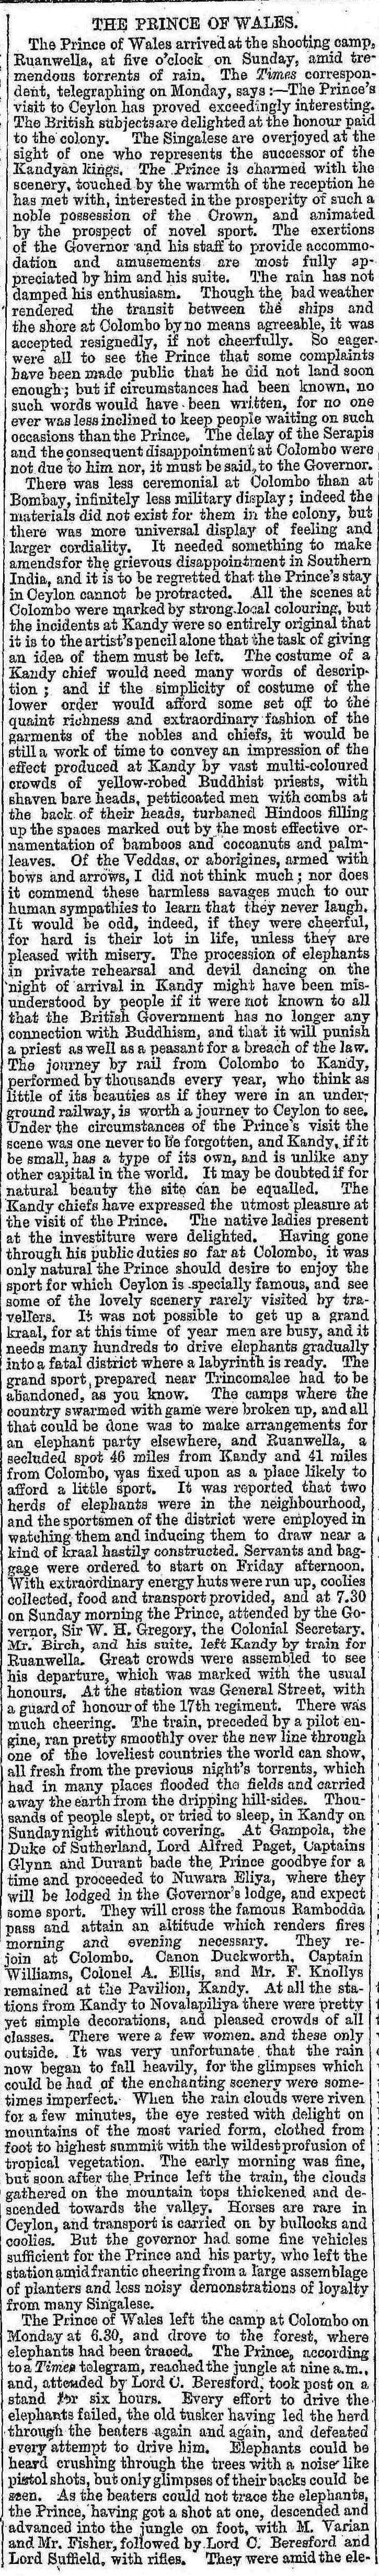 27.The Prince of Wales (Visits Ceylon) (Pt 1)